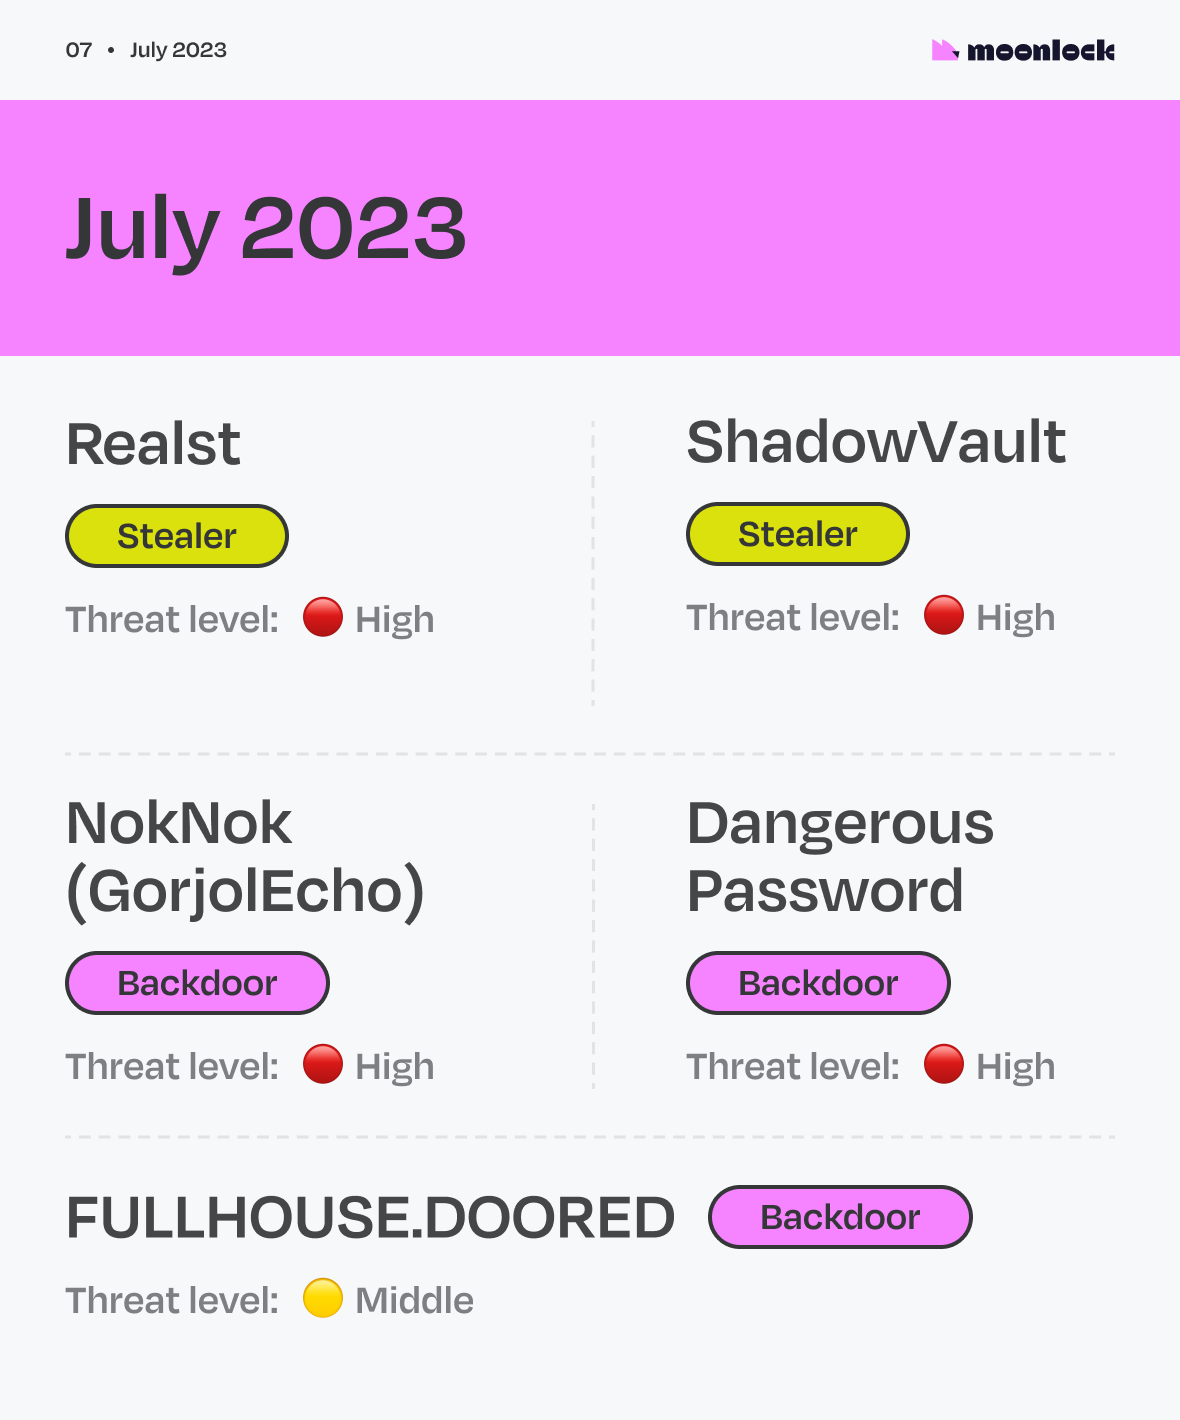 A year in malware: The biggest macOS malware threats in 2023, July image.